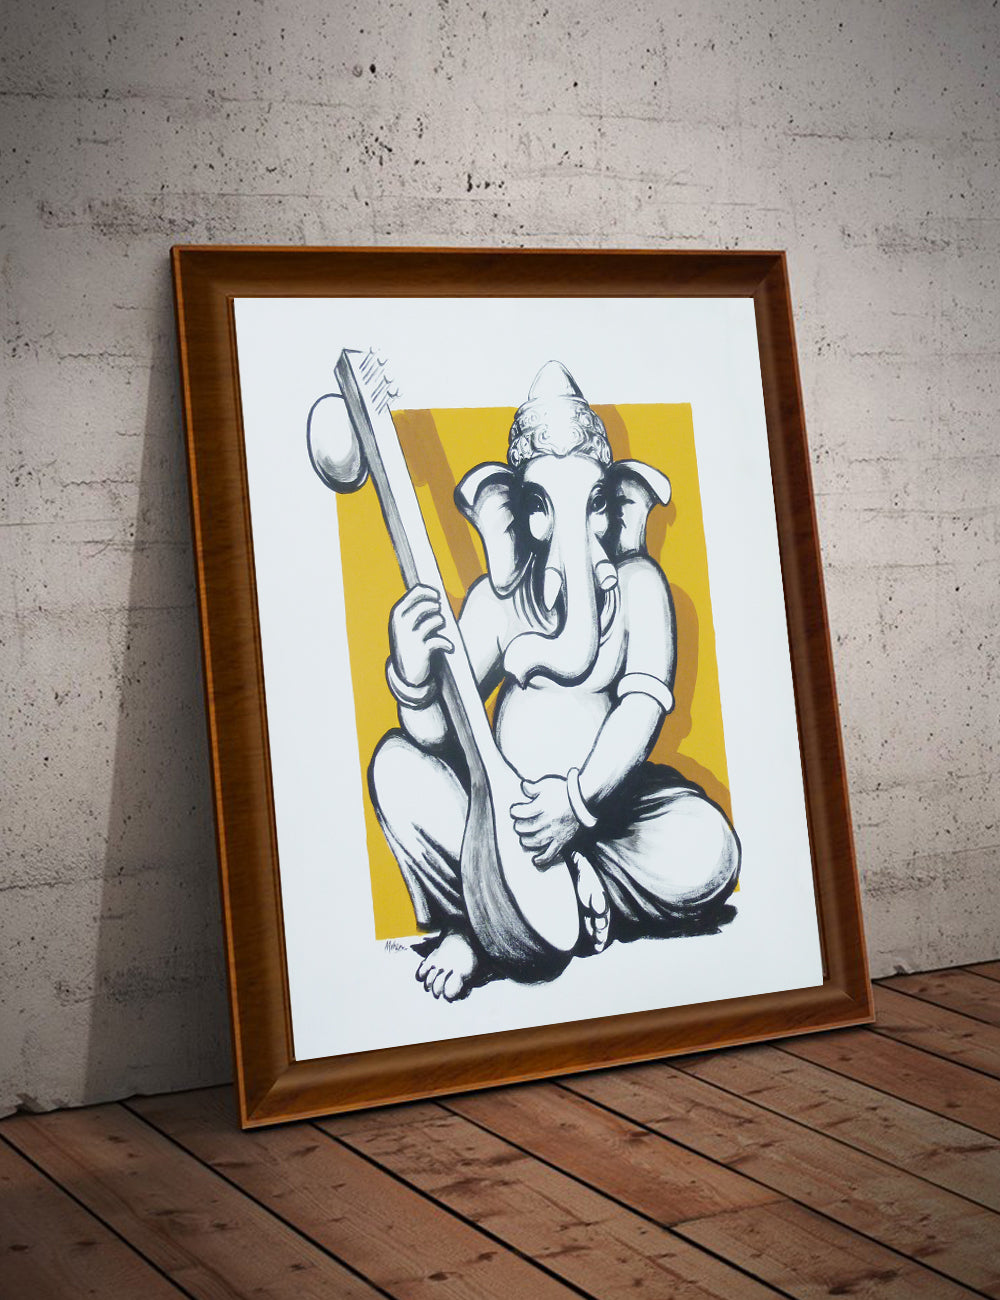 Ganesh Chaturthi PNG Image, Sketched Indian Ganesh Chaturthi Elephant,  India, God, Nationality PNG Image For Free Download